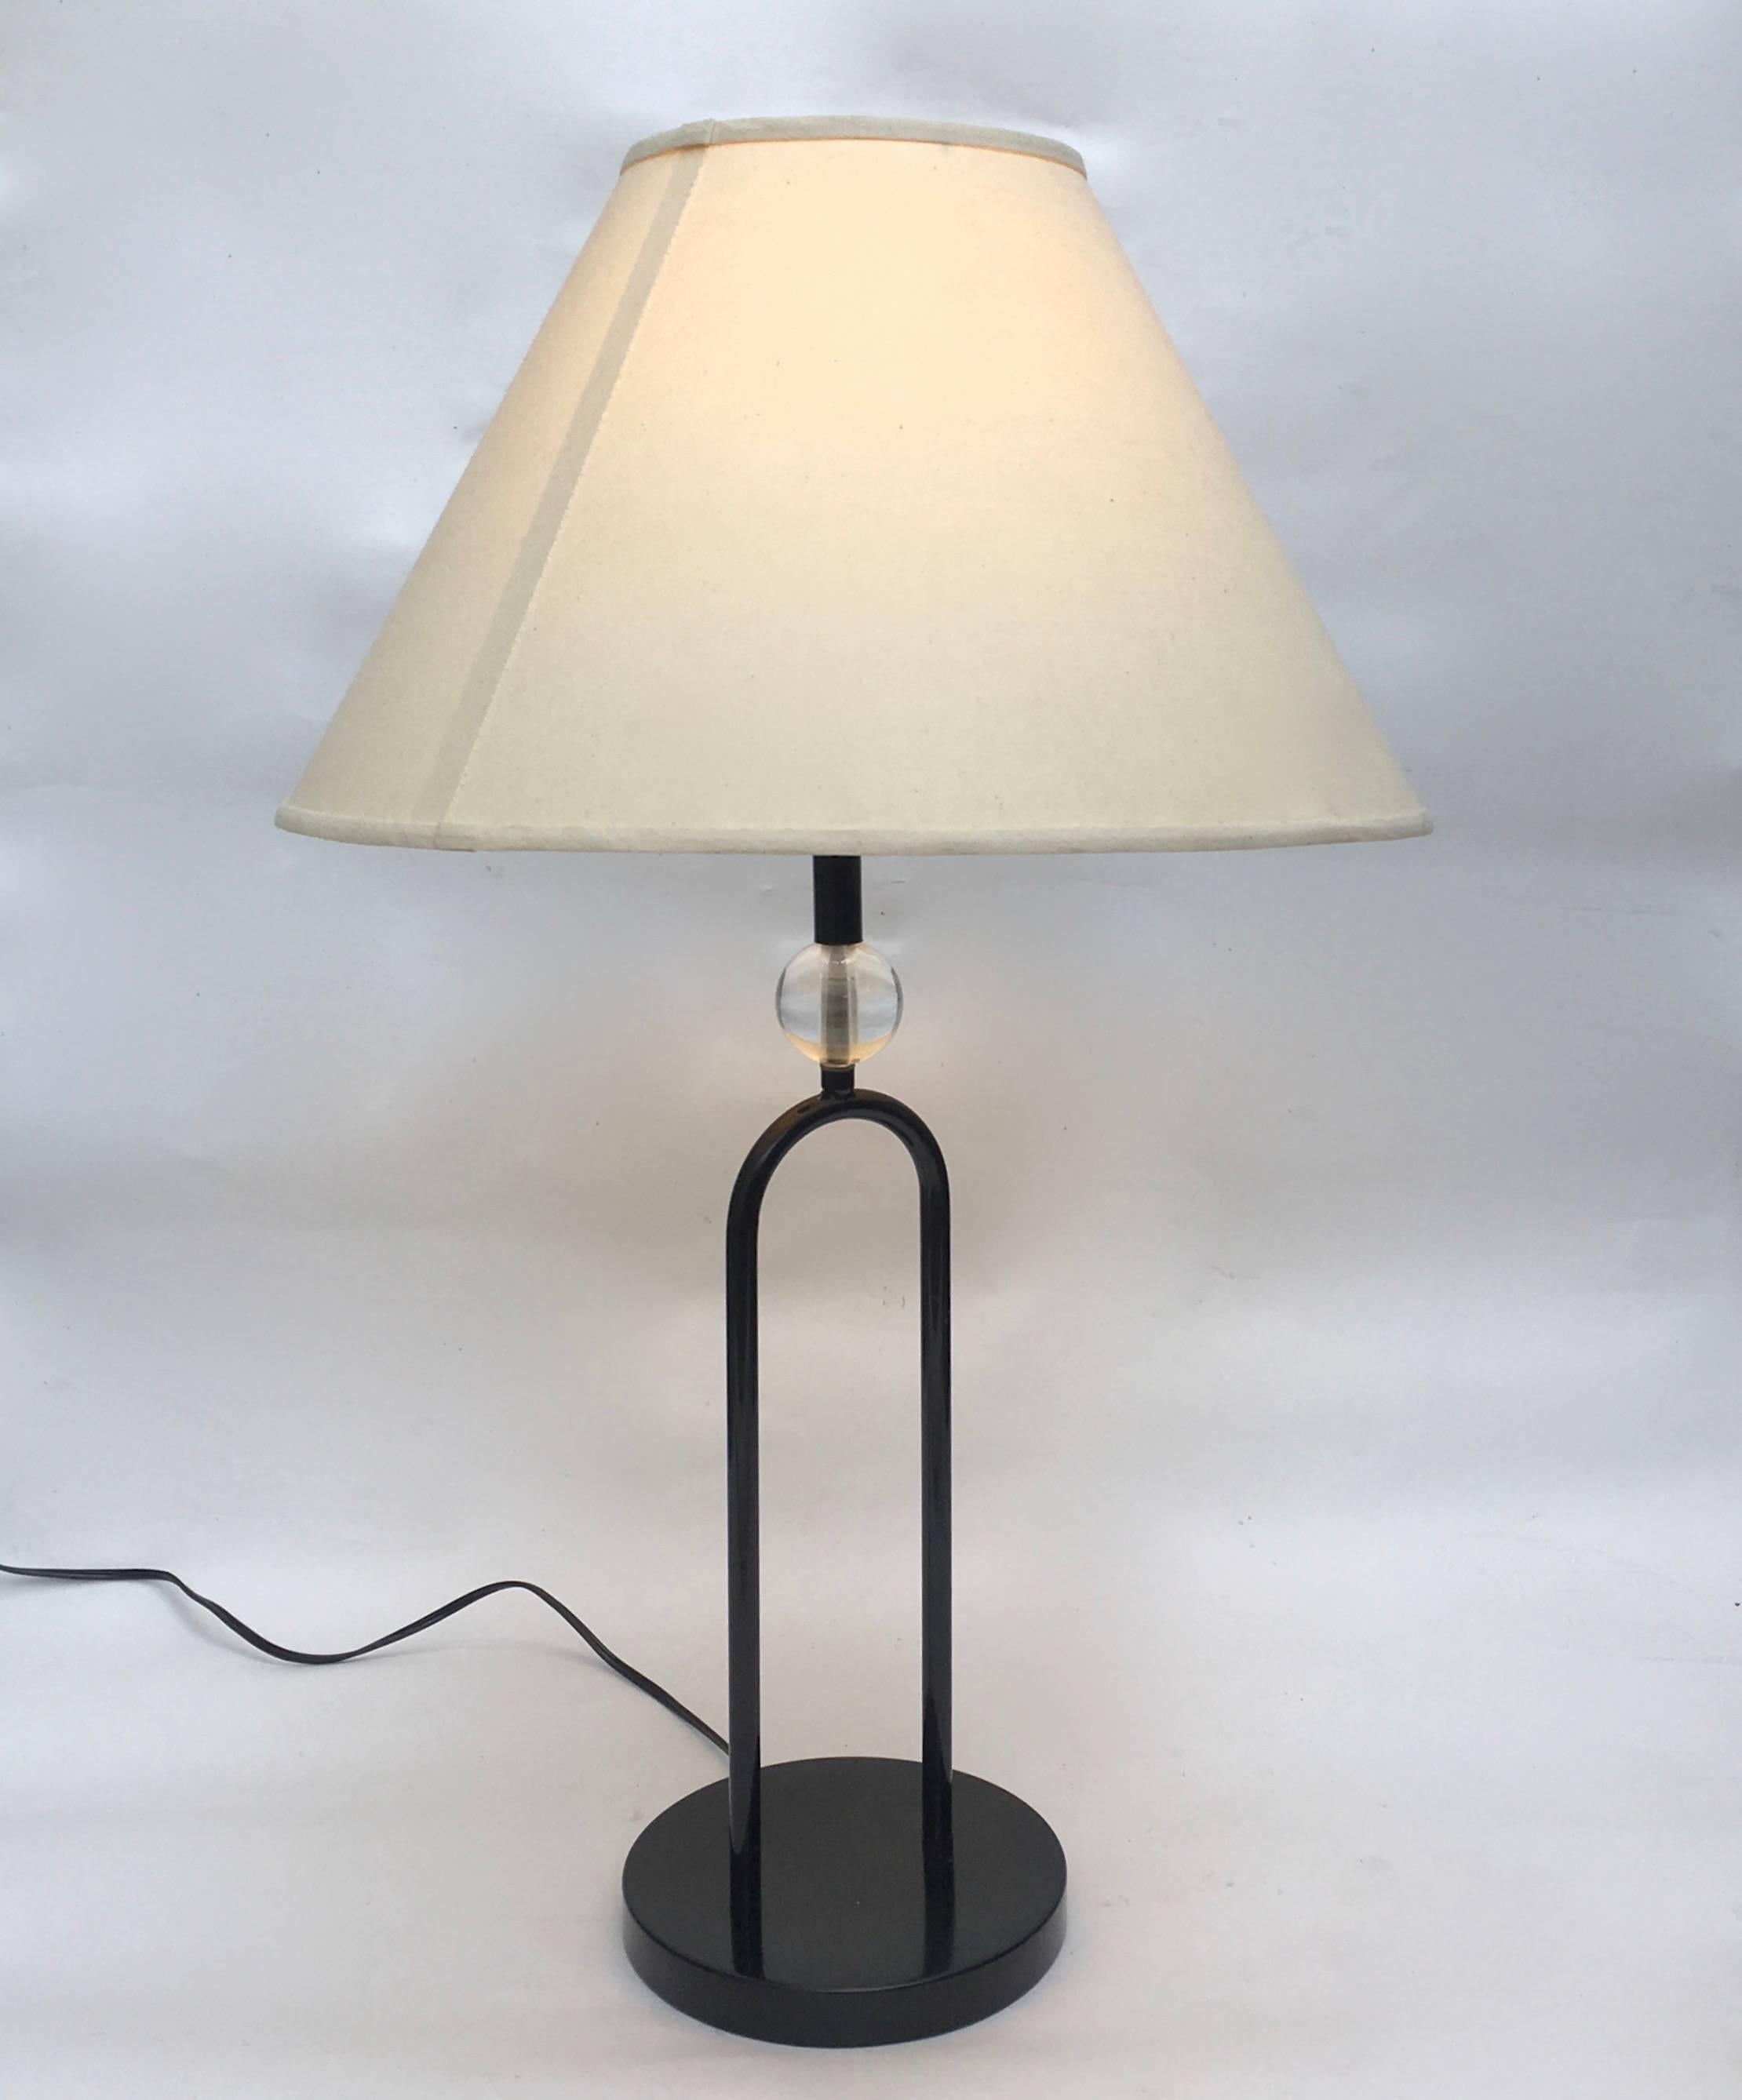 New Age Modernist Table Lamp In Excellent Condition For Sale In Treasure Island, CA